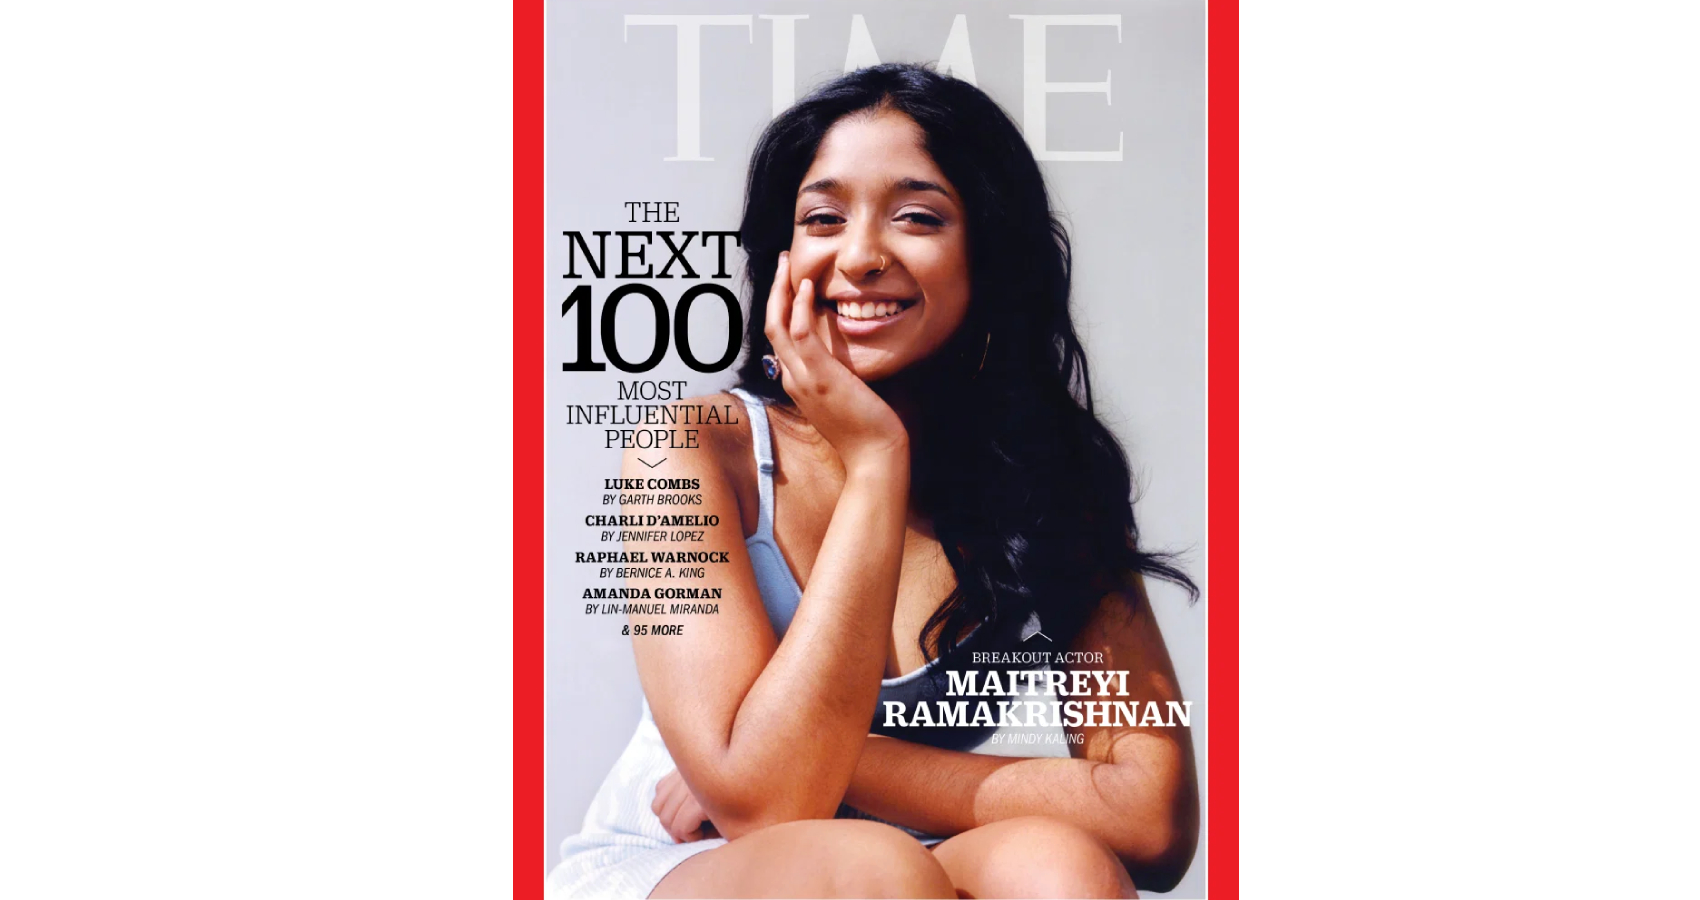 Eight Persons of Indian Origin on TIME’s 100 Most Influential People